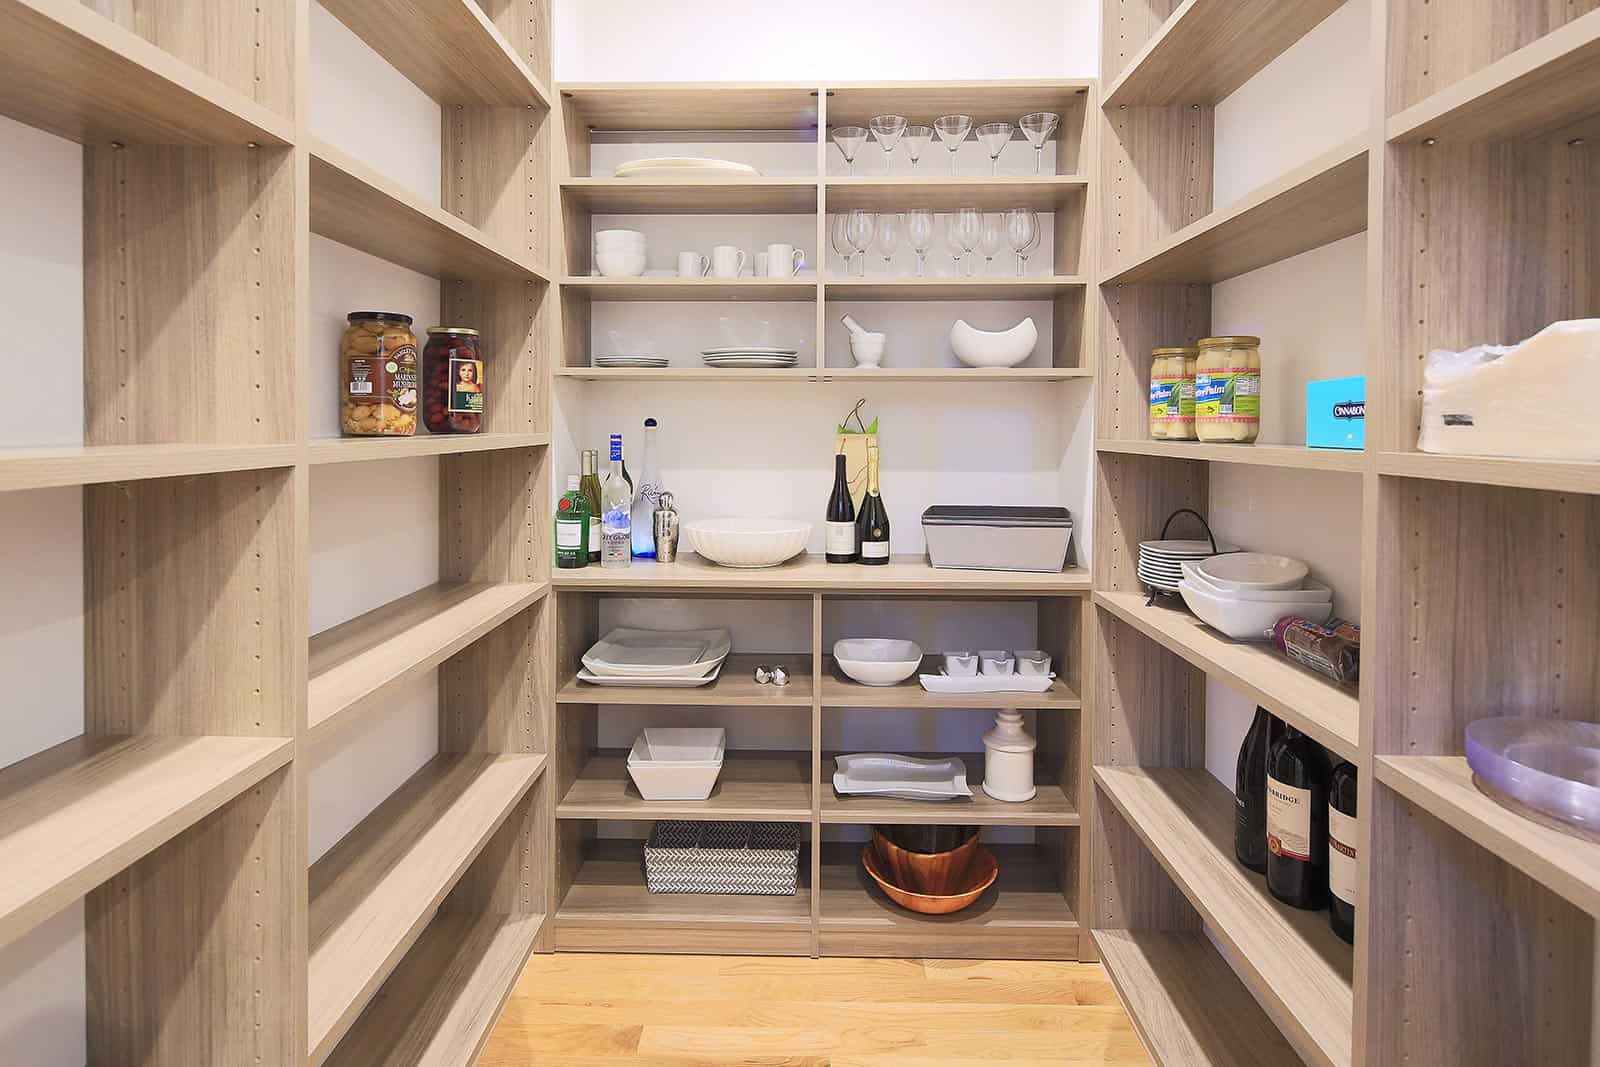 Custom Closets And Storage Solutions For Your Kitchen Pantry